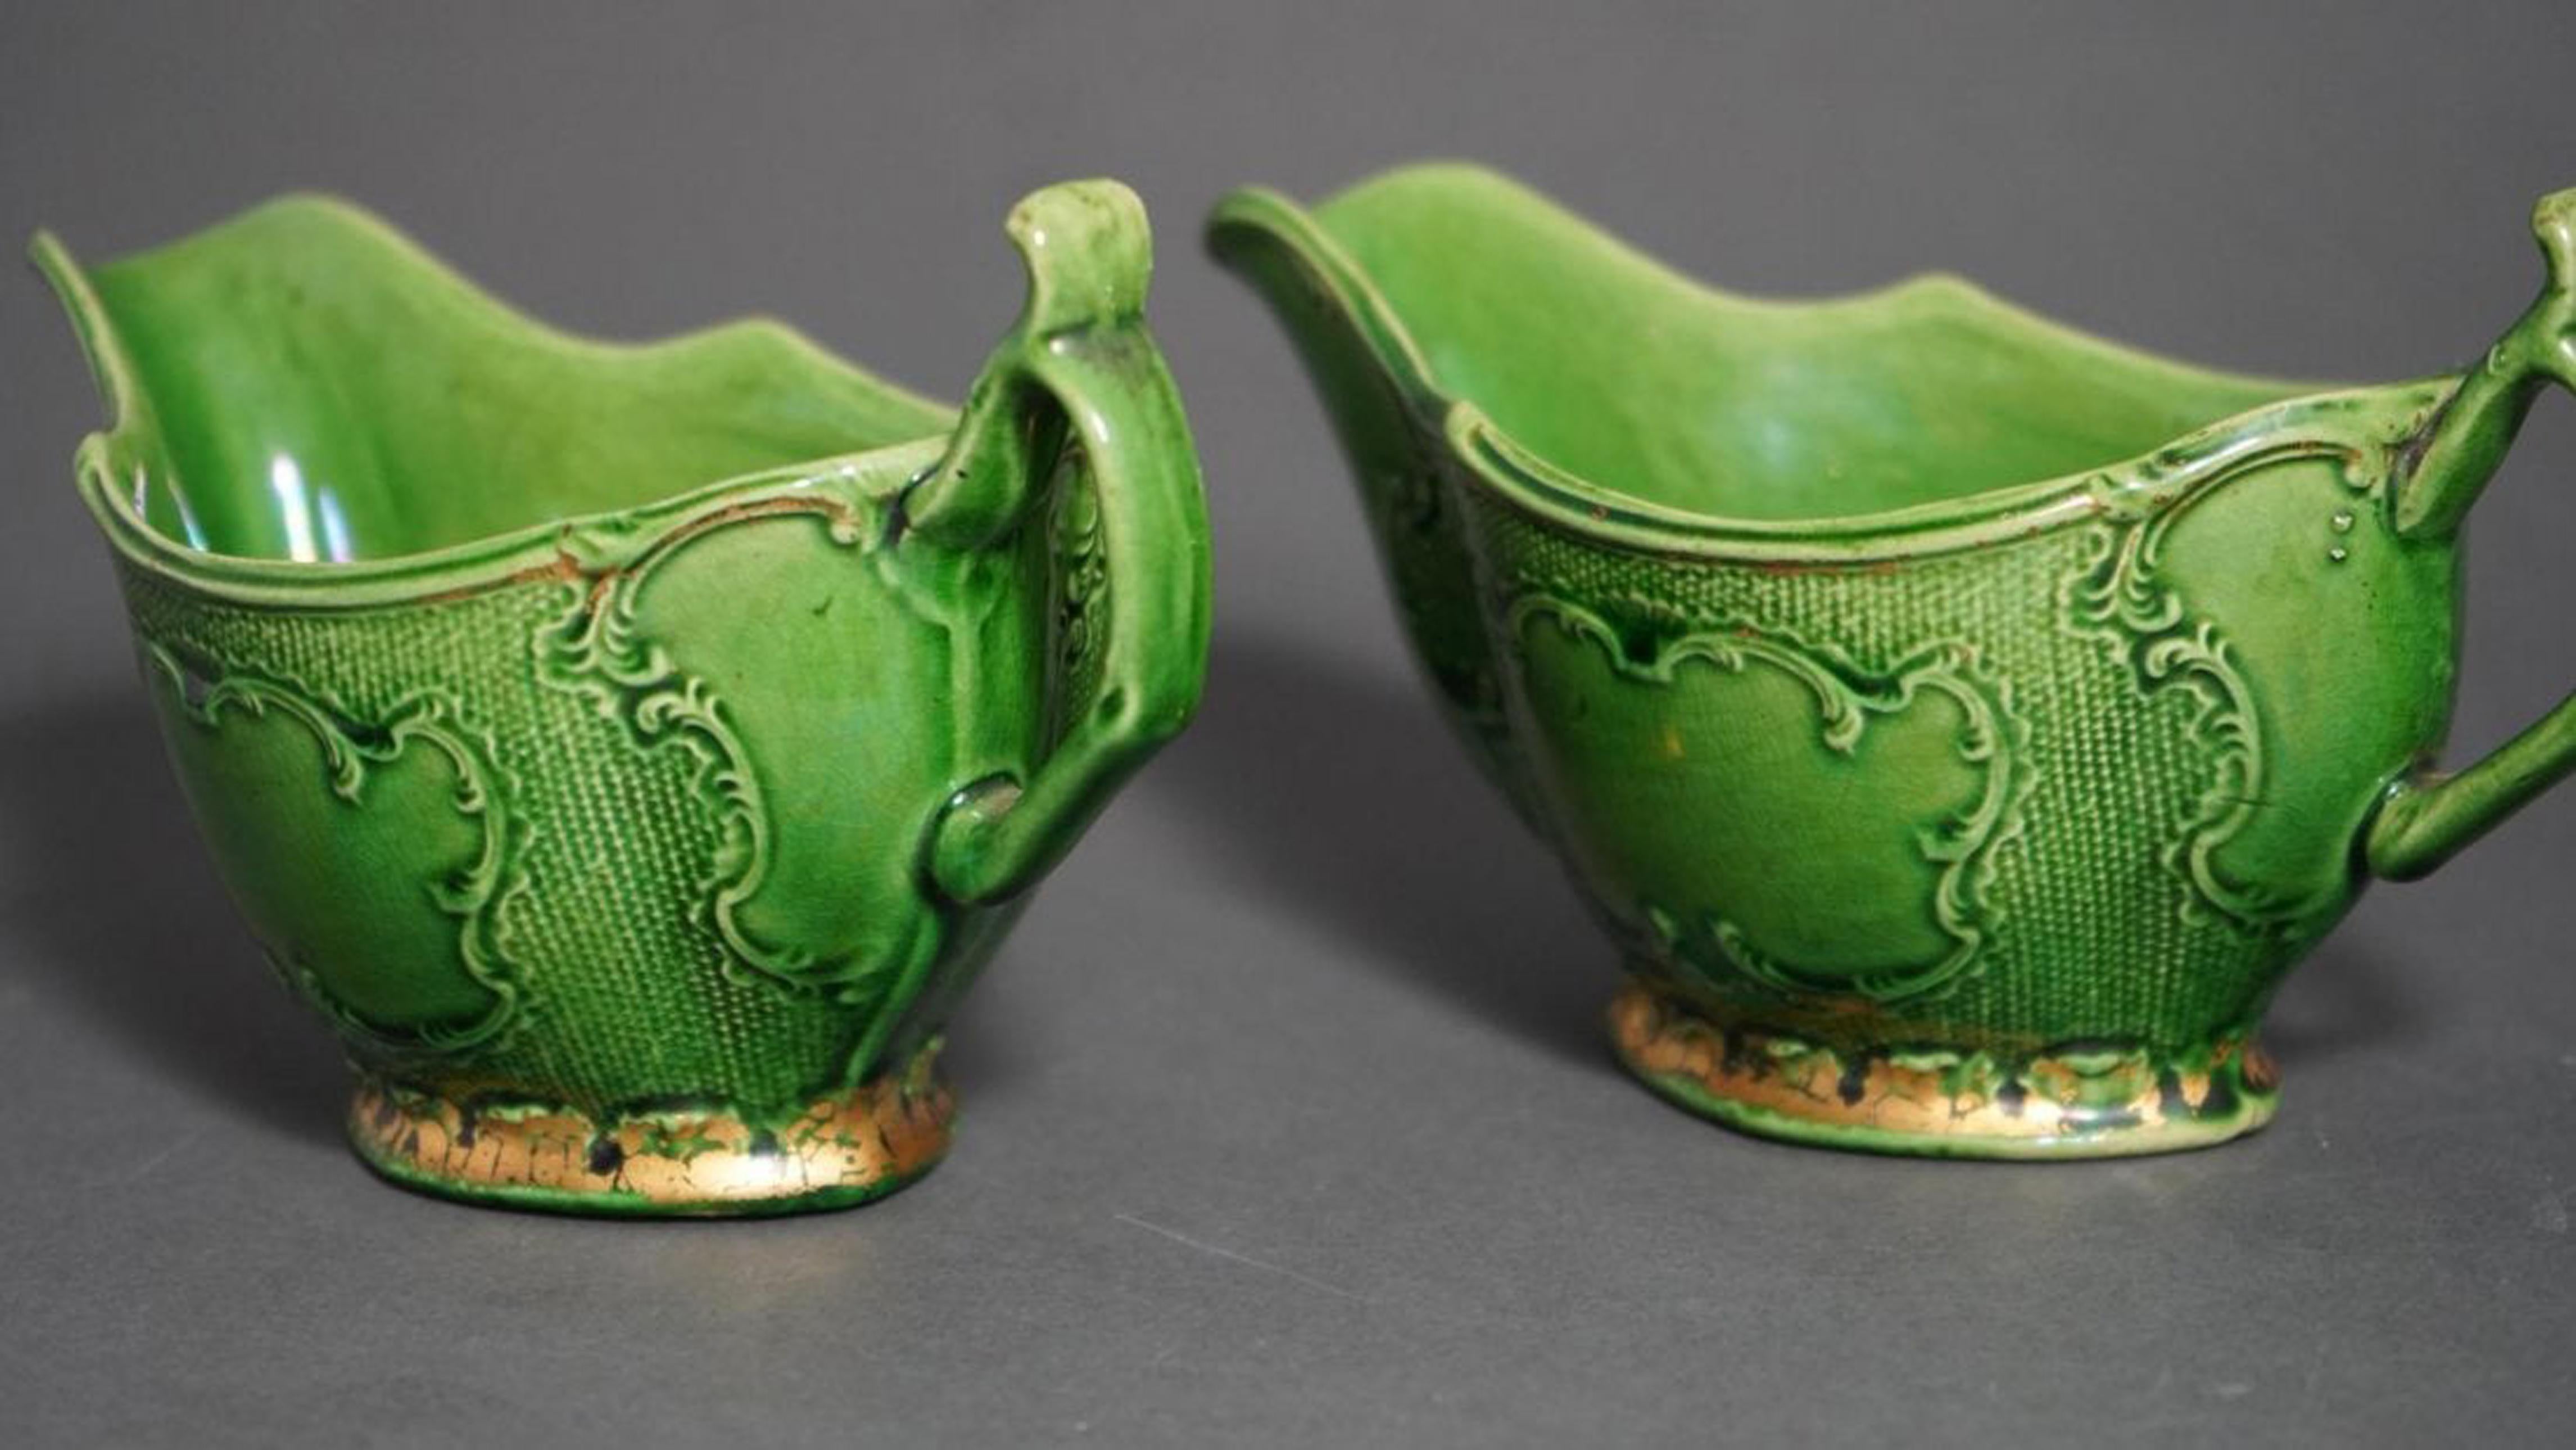 Creamware 18th Century Whieldon-Type Green-Glazed Sauceboats with Remains of Original Gilt